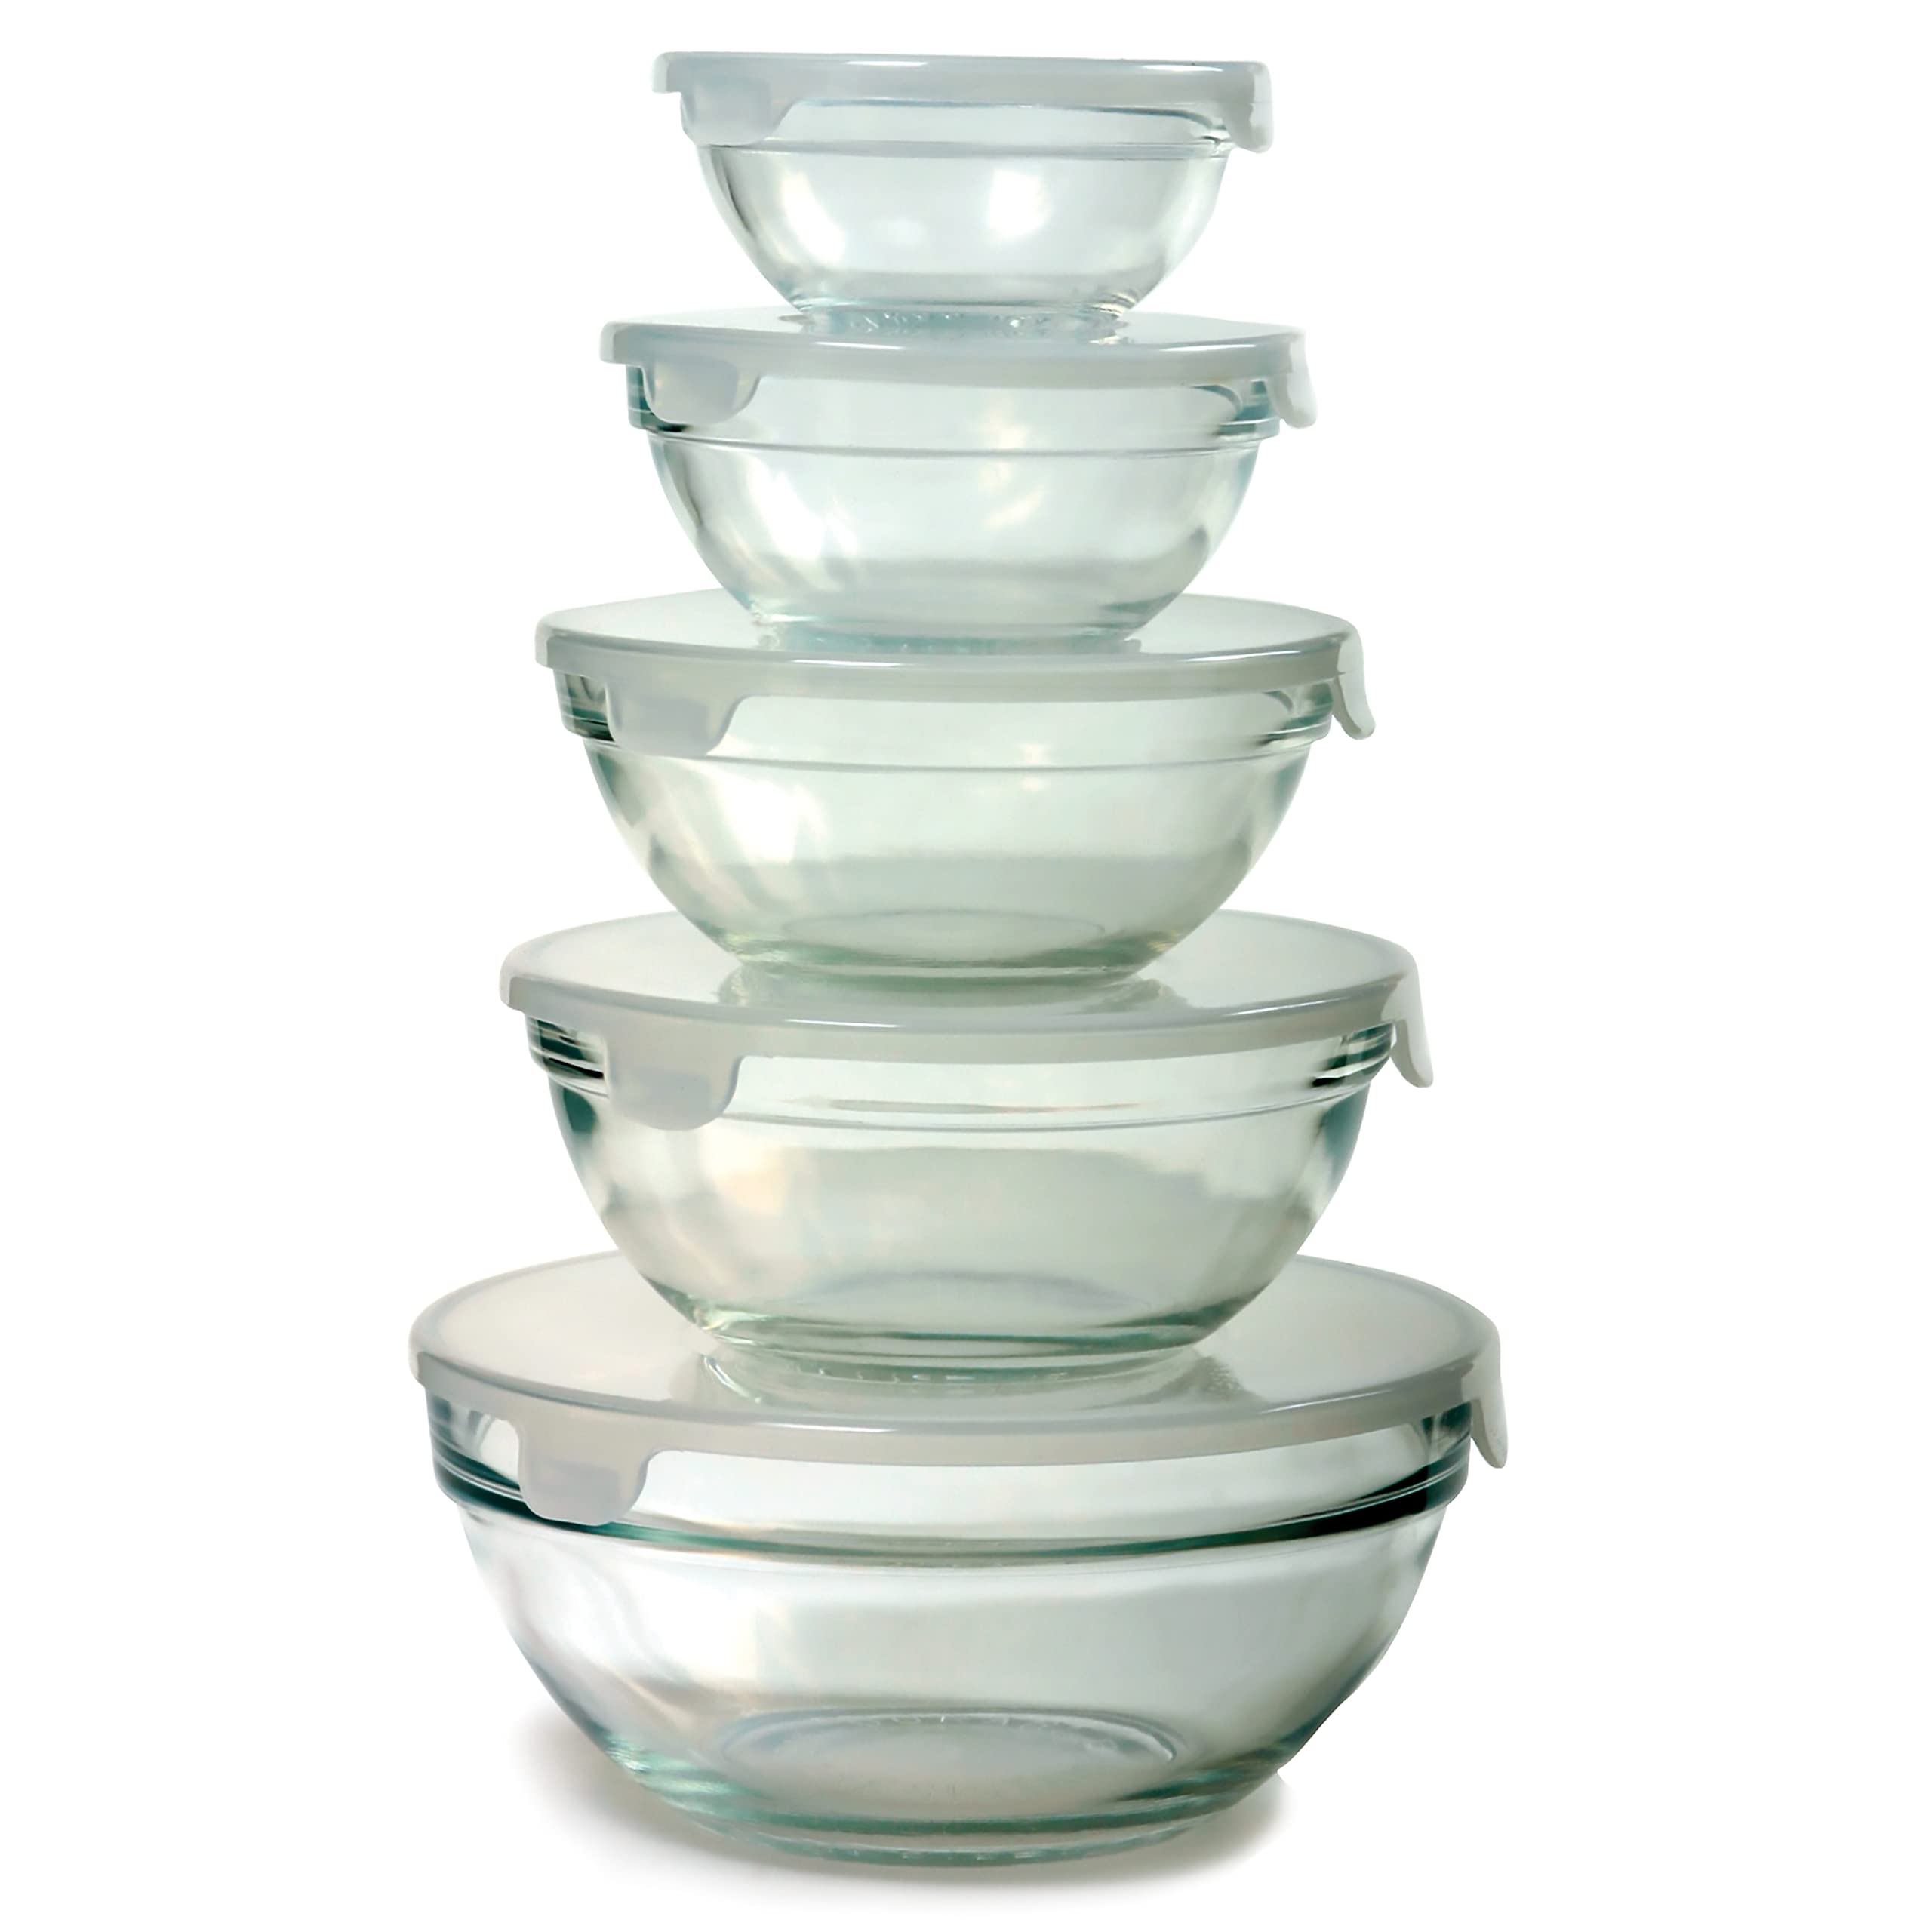 Norpro 10-Piece Nesting Glass Mixing/Storage Bowls with Lids